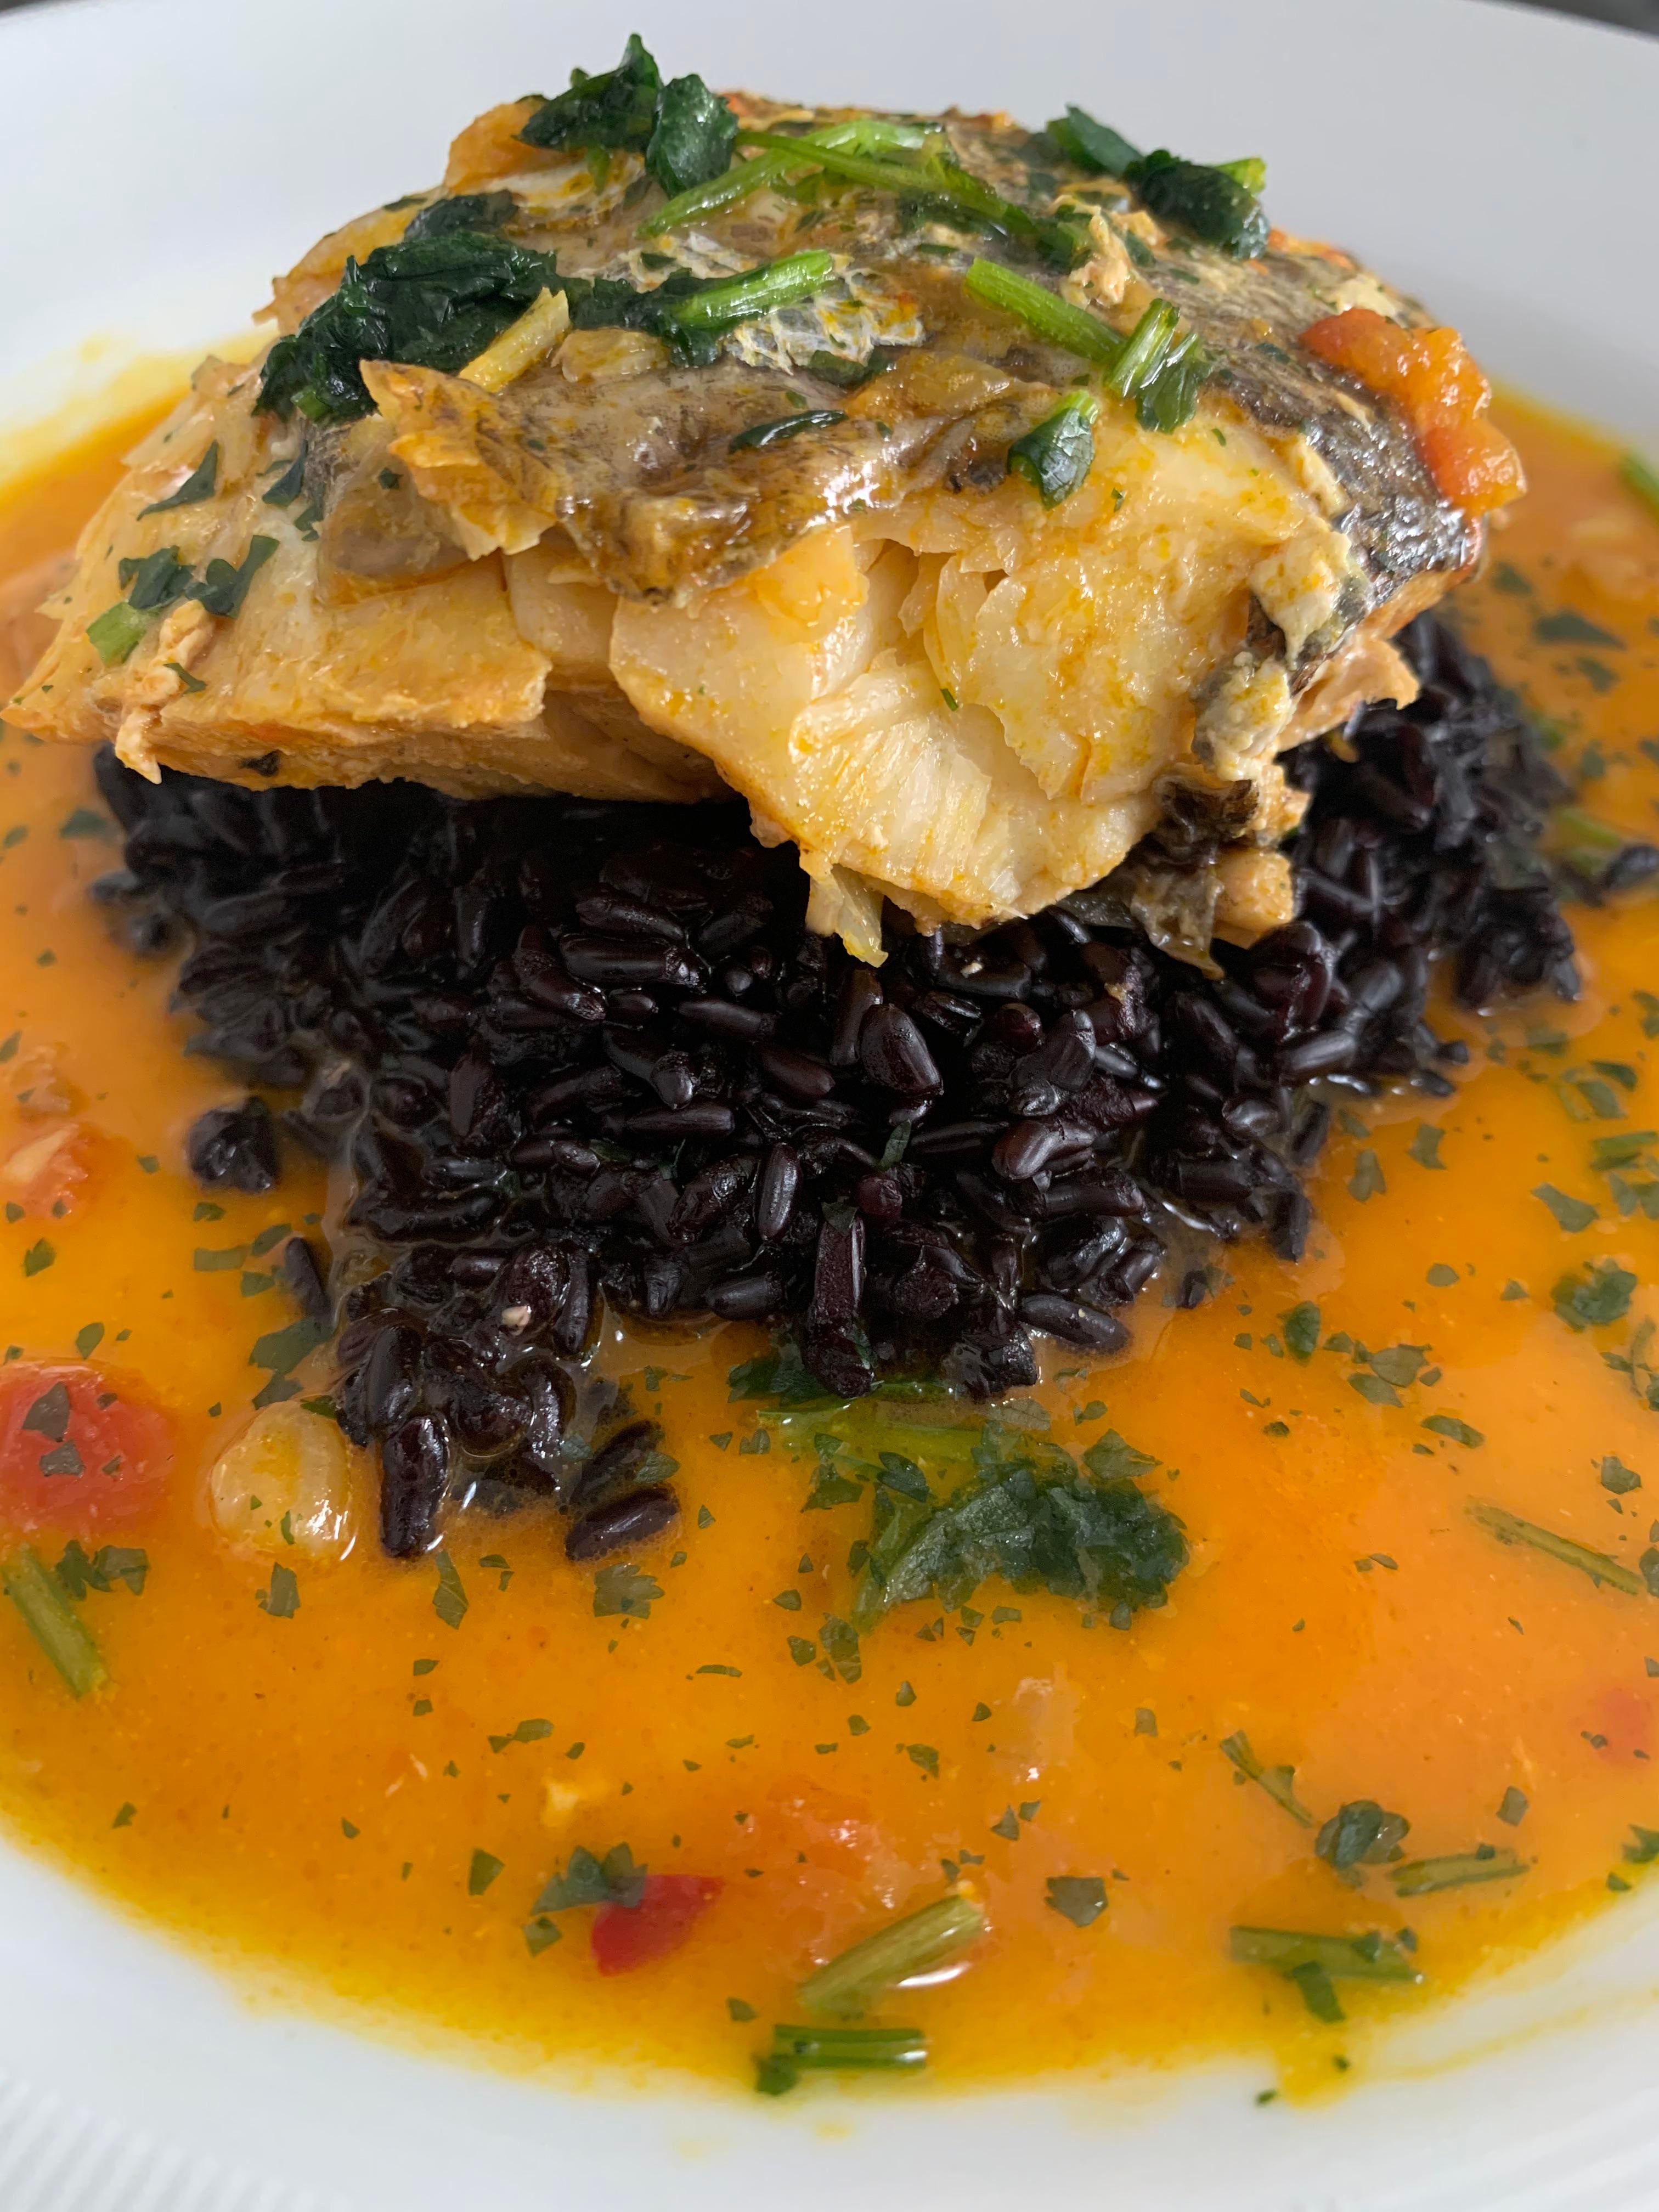 Fish moqueca with black rice. Typical dish from northeastern Brazil ...